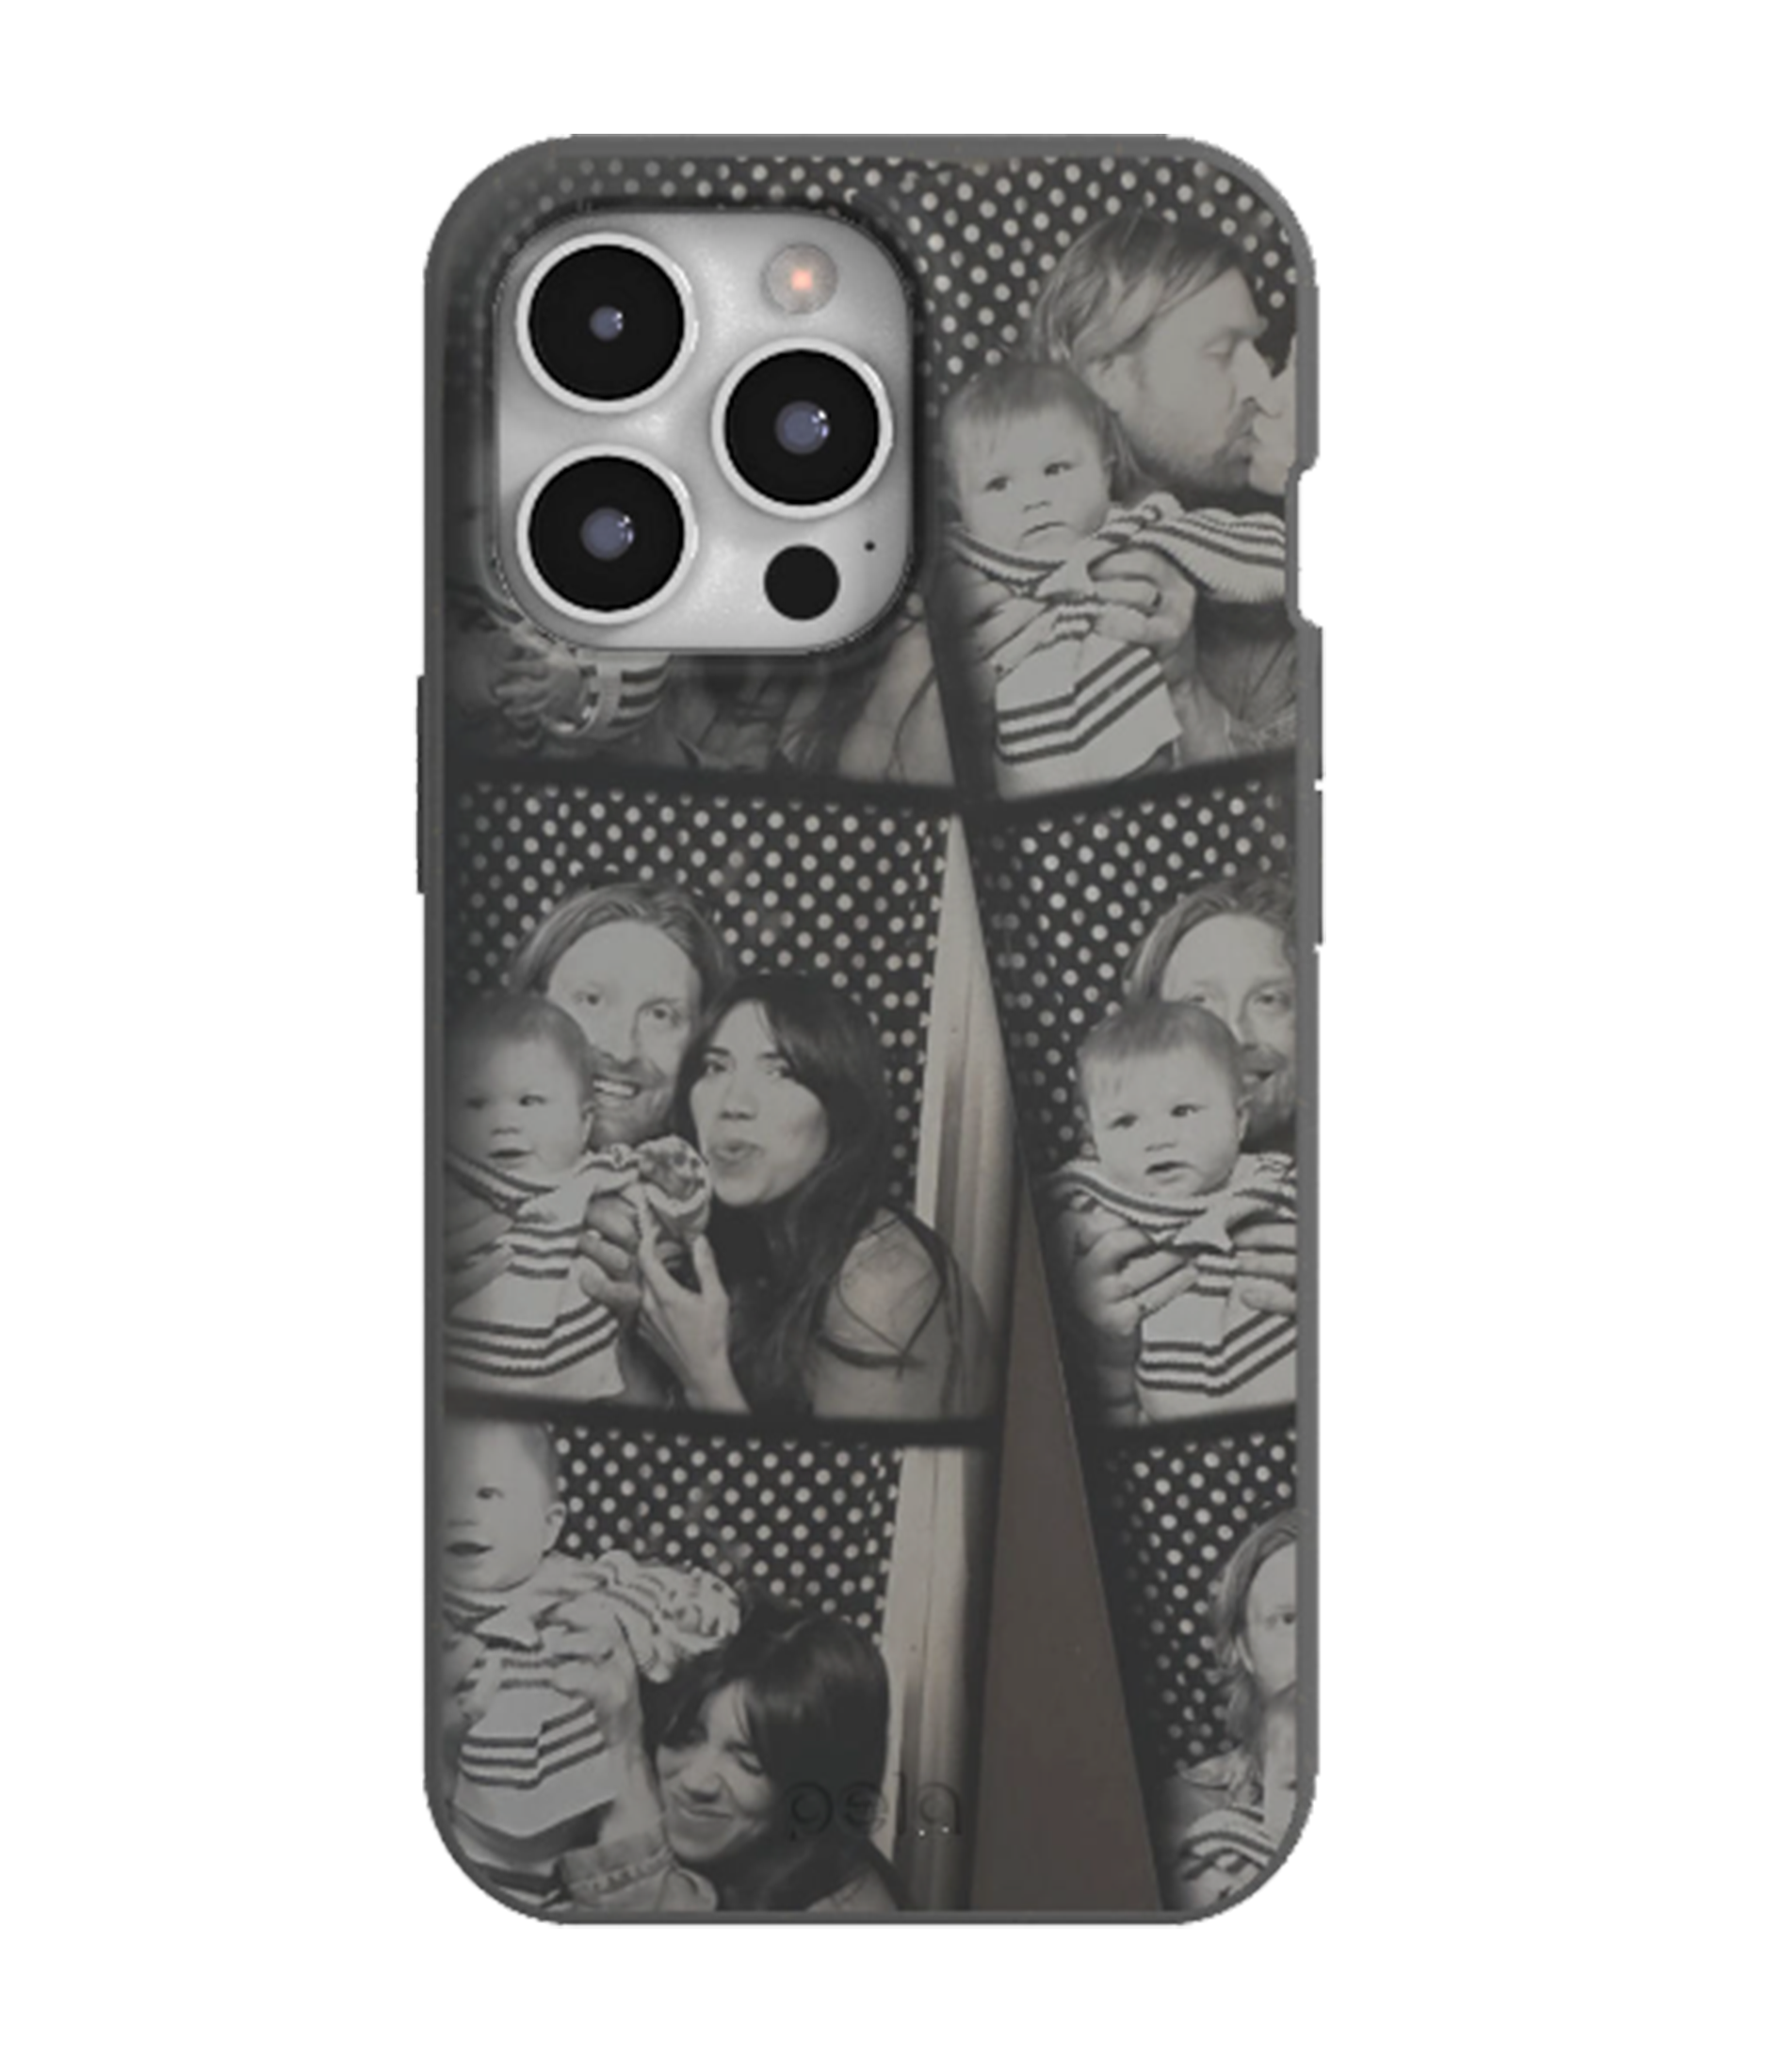 Custom phone case with a series of black and white photobooth images of a family.